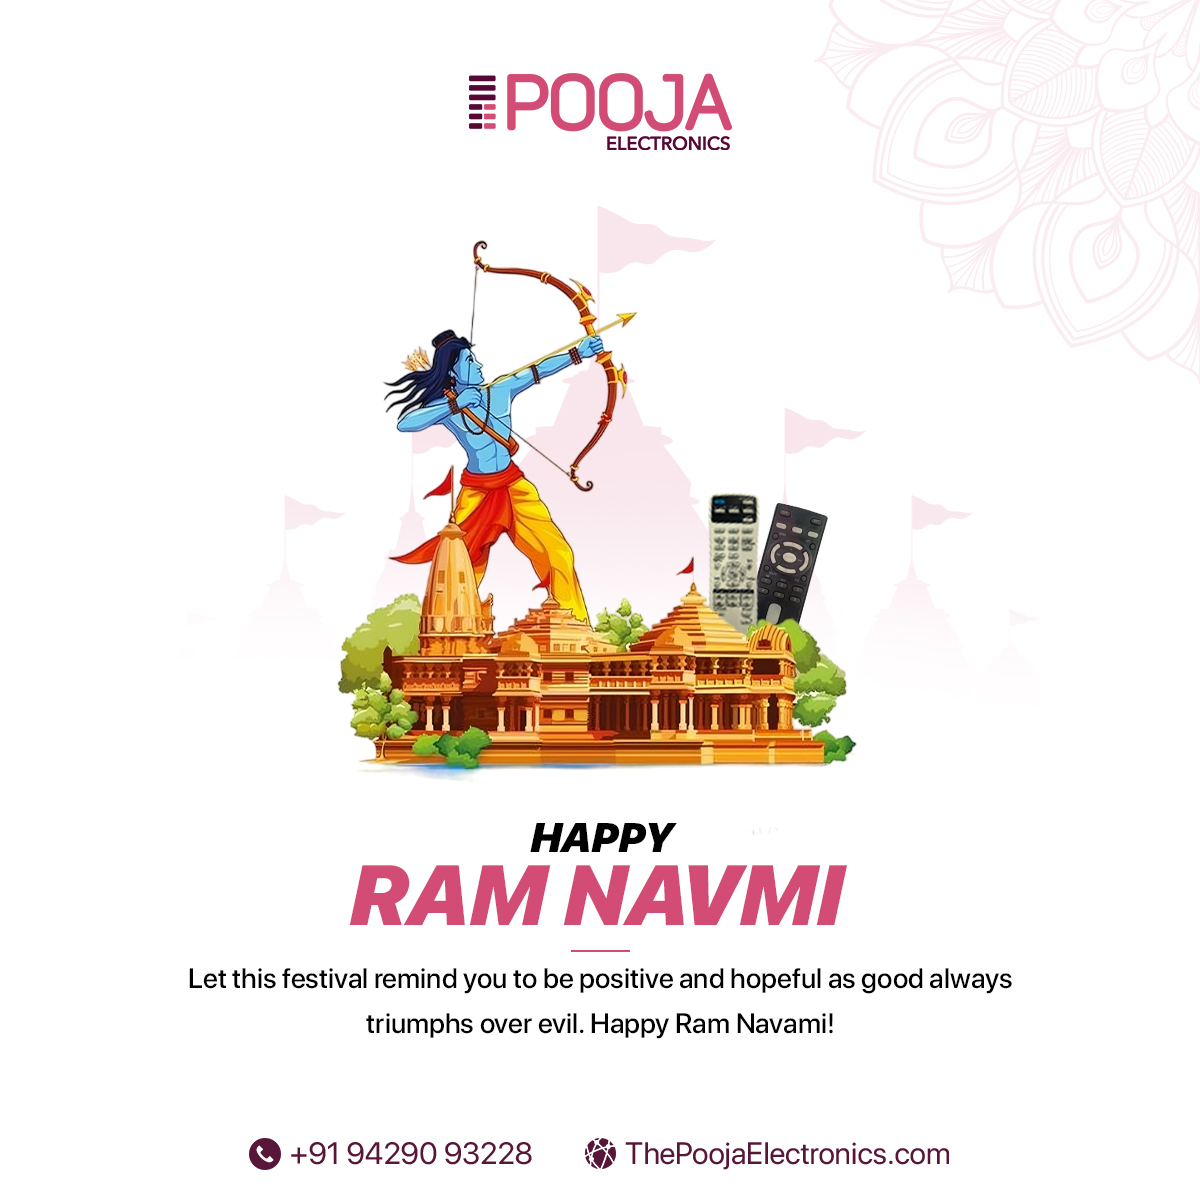 Let this festival remind you to be positive and hopeful, as good always triumphs over evil. Happy Ram Navami!
.
#poojaelectronics #ramnavami #RemotePeace #tvremote #acremote #caraudioremote #TimeSavingSolution #SeamlessConnectivity #DigitalEntertainment #connectivity #wholesaler